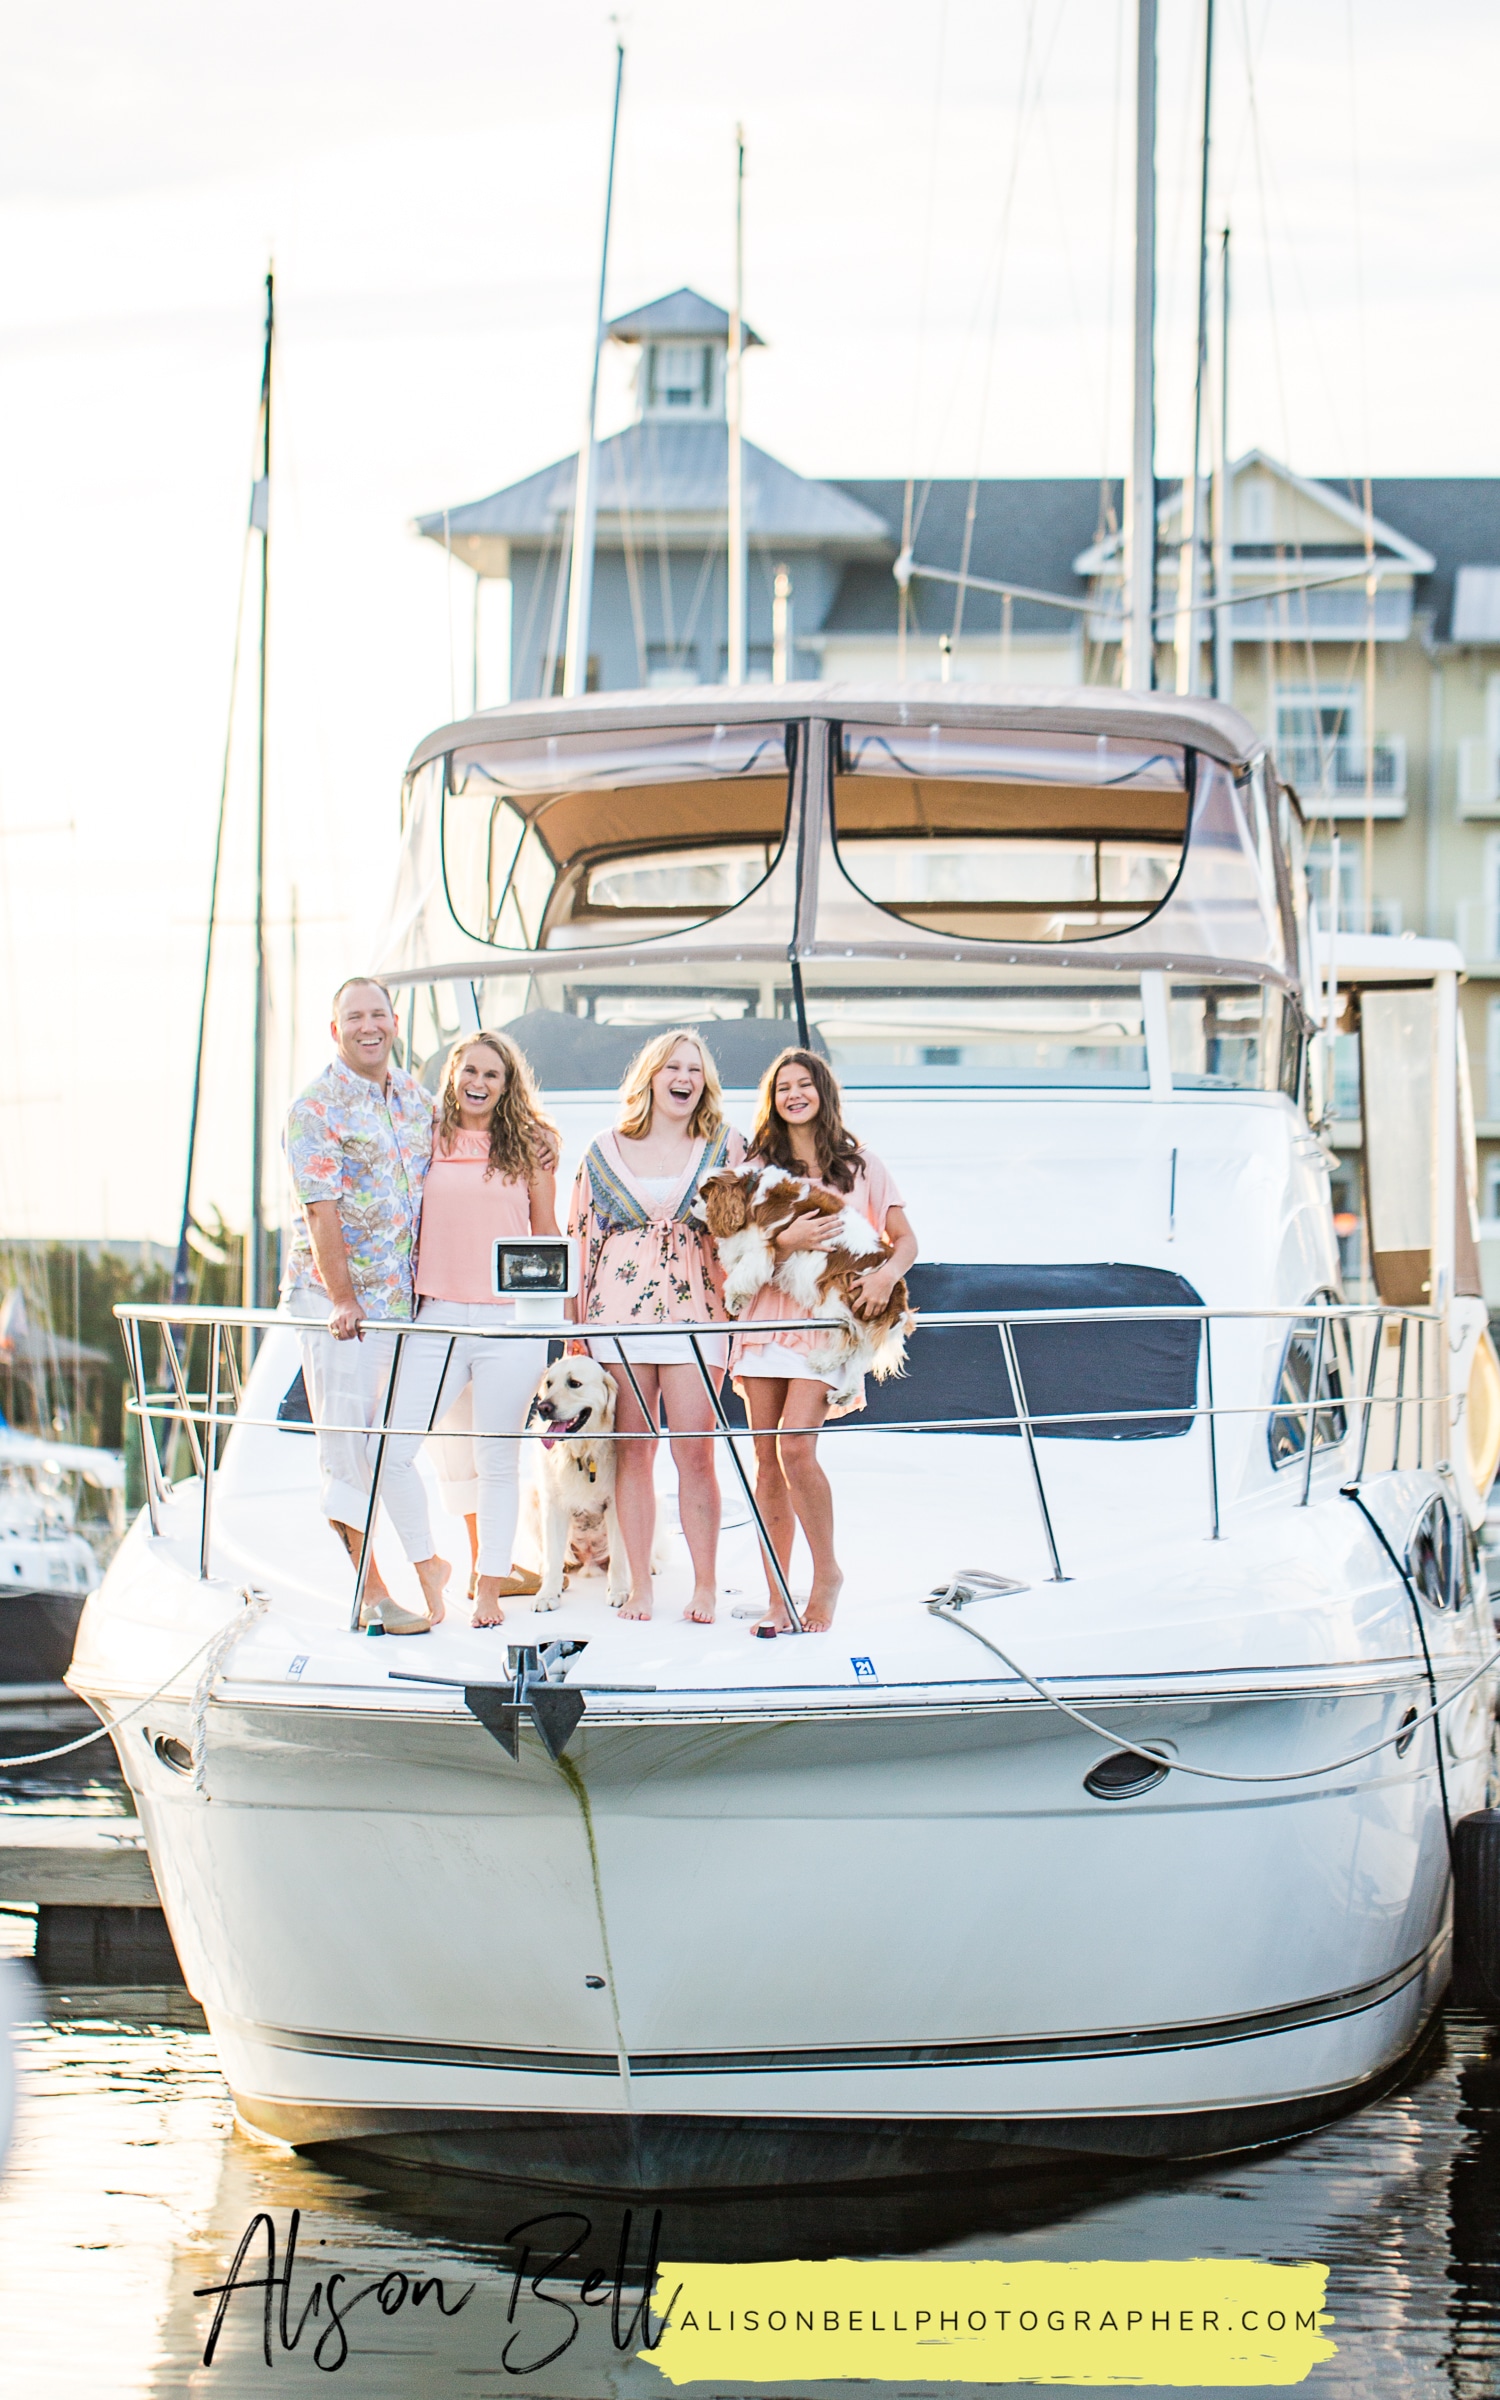 Family photo session on the boat docked in the marina, east beach norfolk